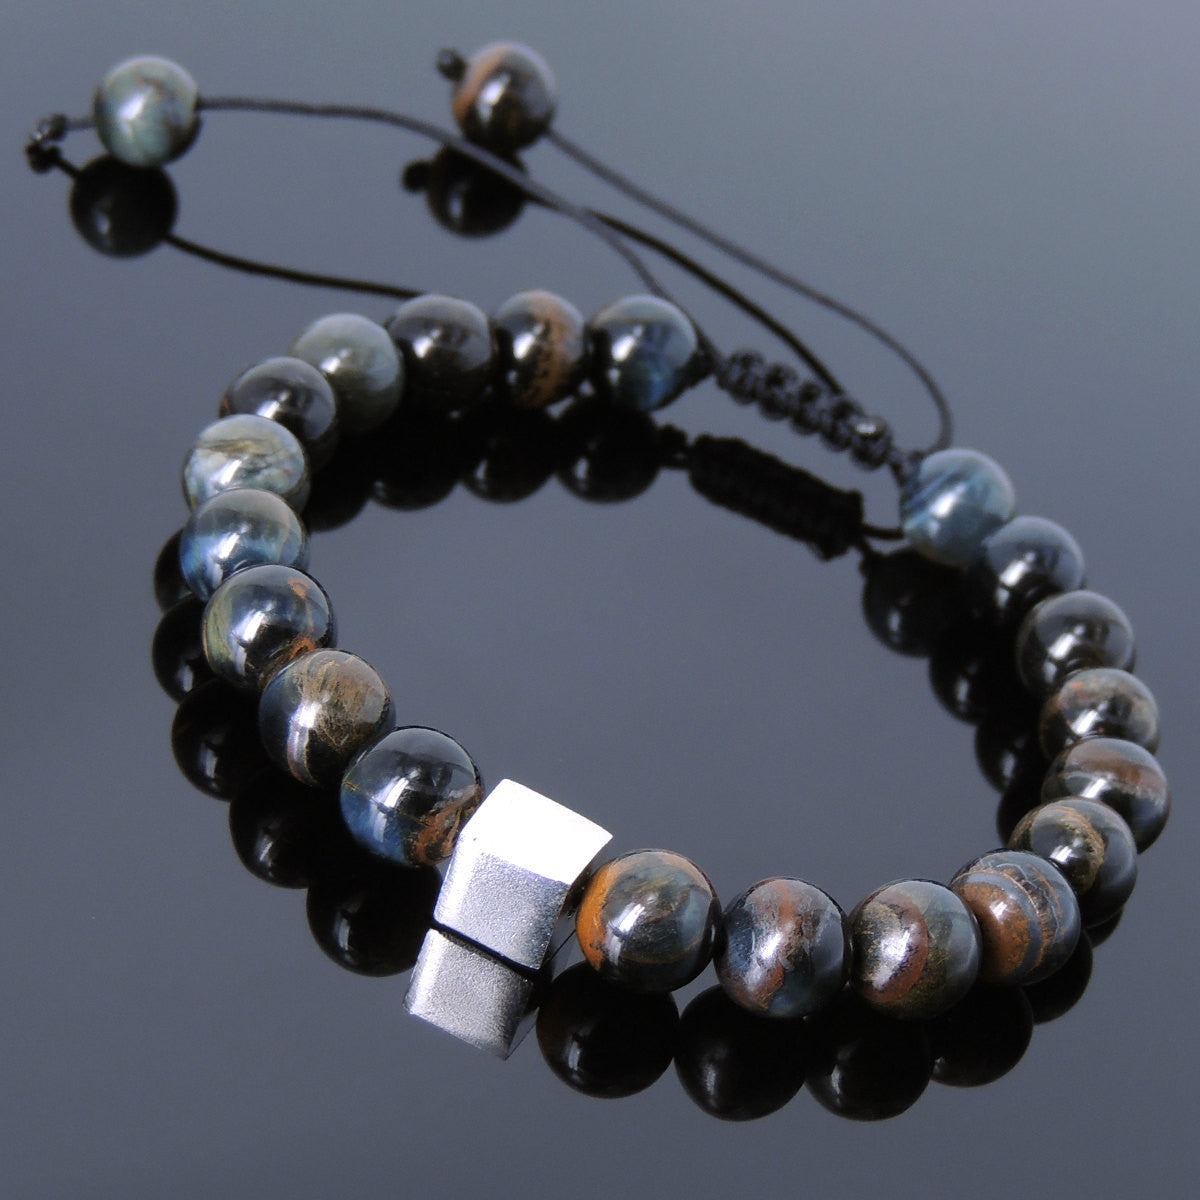 Rare Mixed Blue Tiger Eye Adjustable Braided Gemstone Bracelet with S925 Sterling Silver Cube Bead - Handmade by Gem & Silver BR803